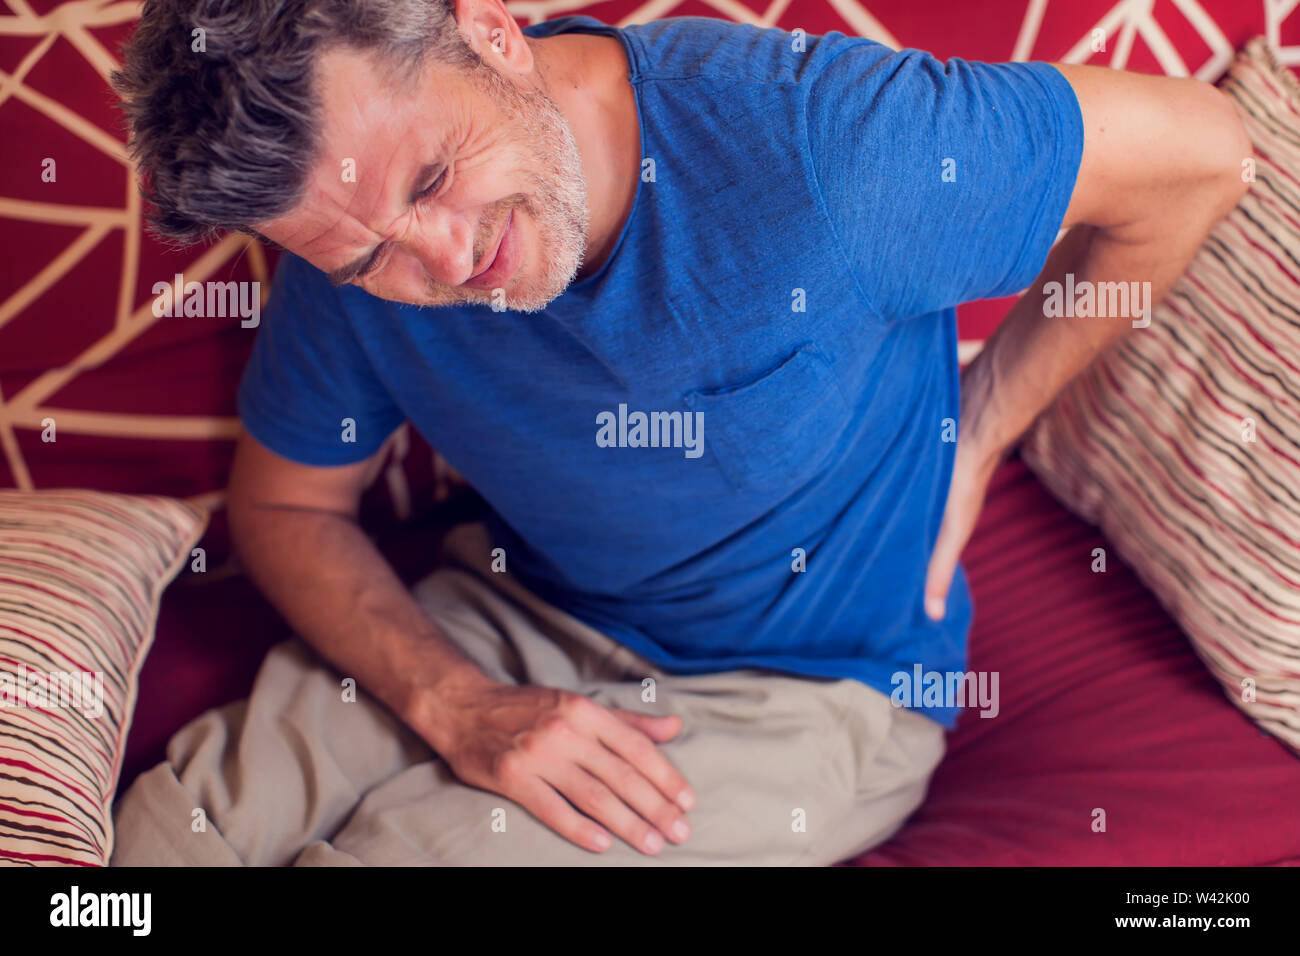 Man feels strong back pain at home. People, healthcare and medicine concept Stock Photo